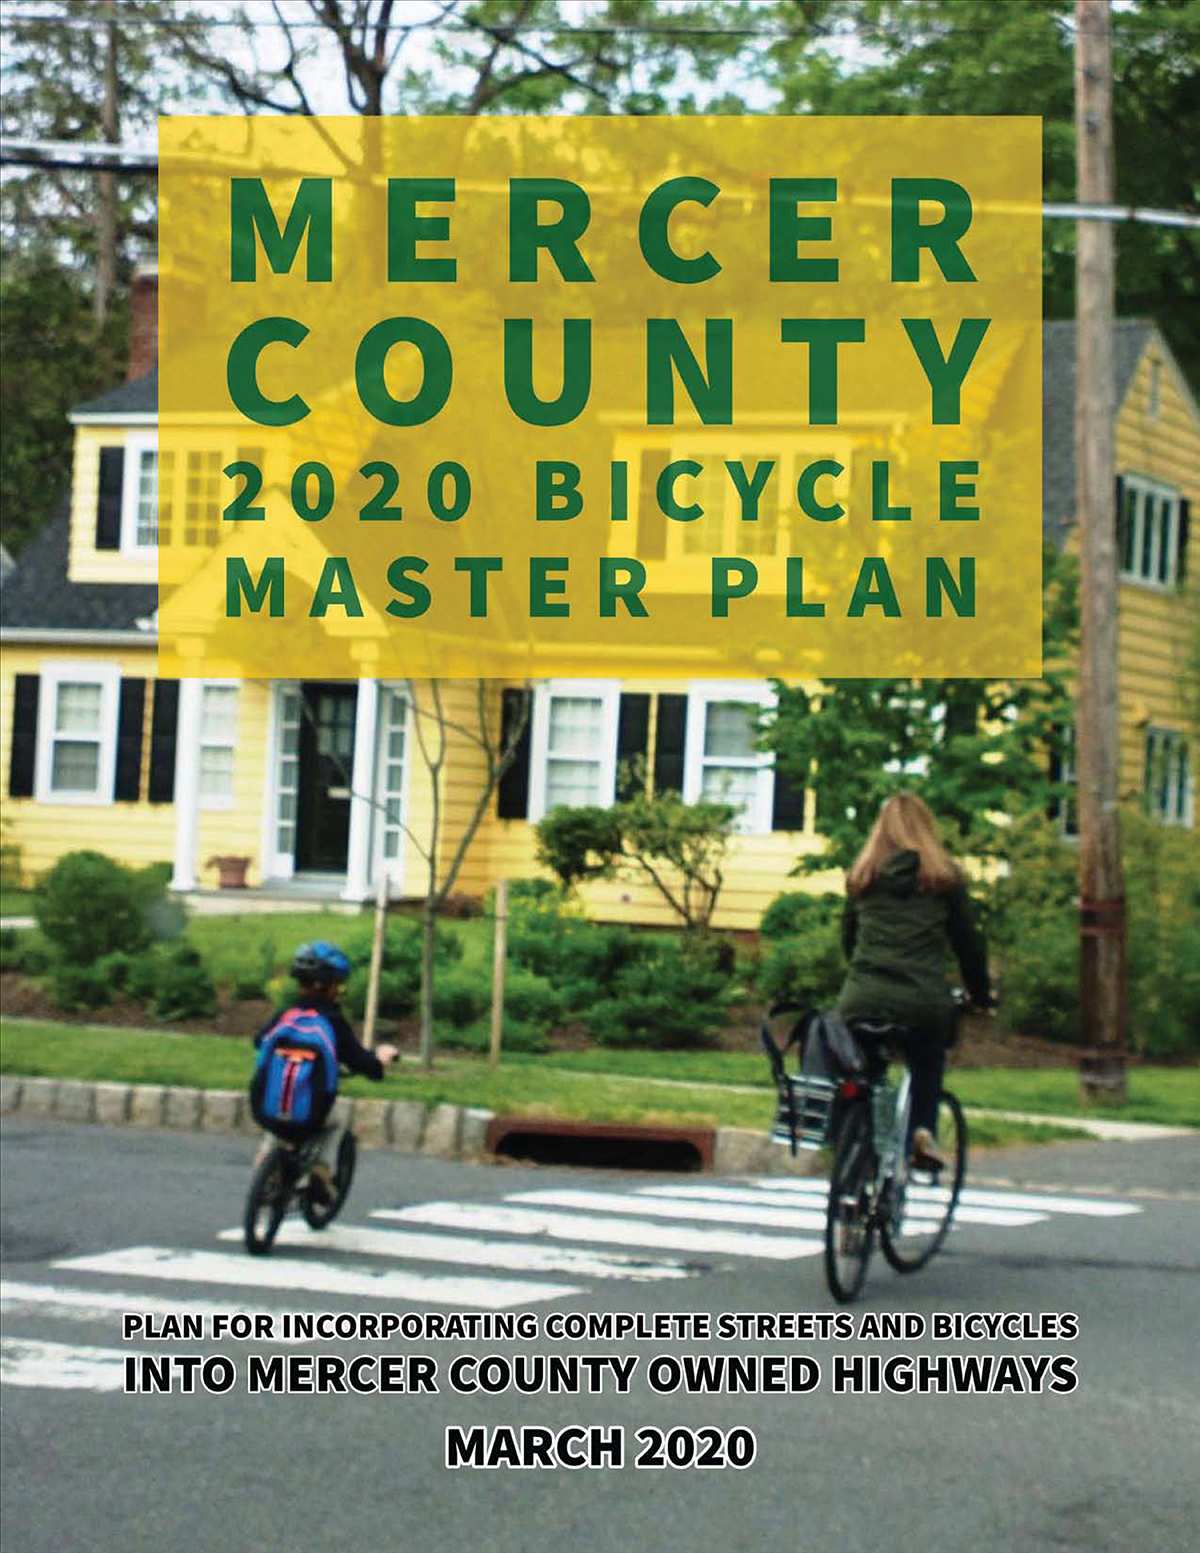 The Mercer County Bicycle Master Plan promotes bike-friendly resurfacing in alignment with the County’s Complete Streets policy.